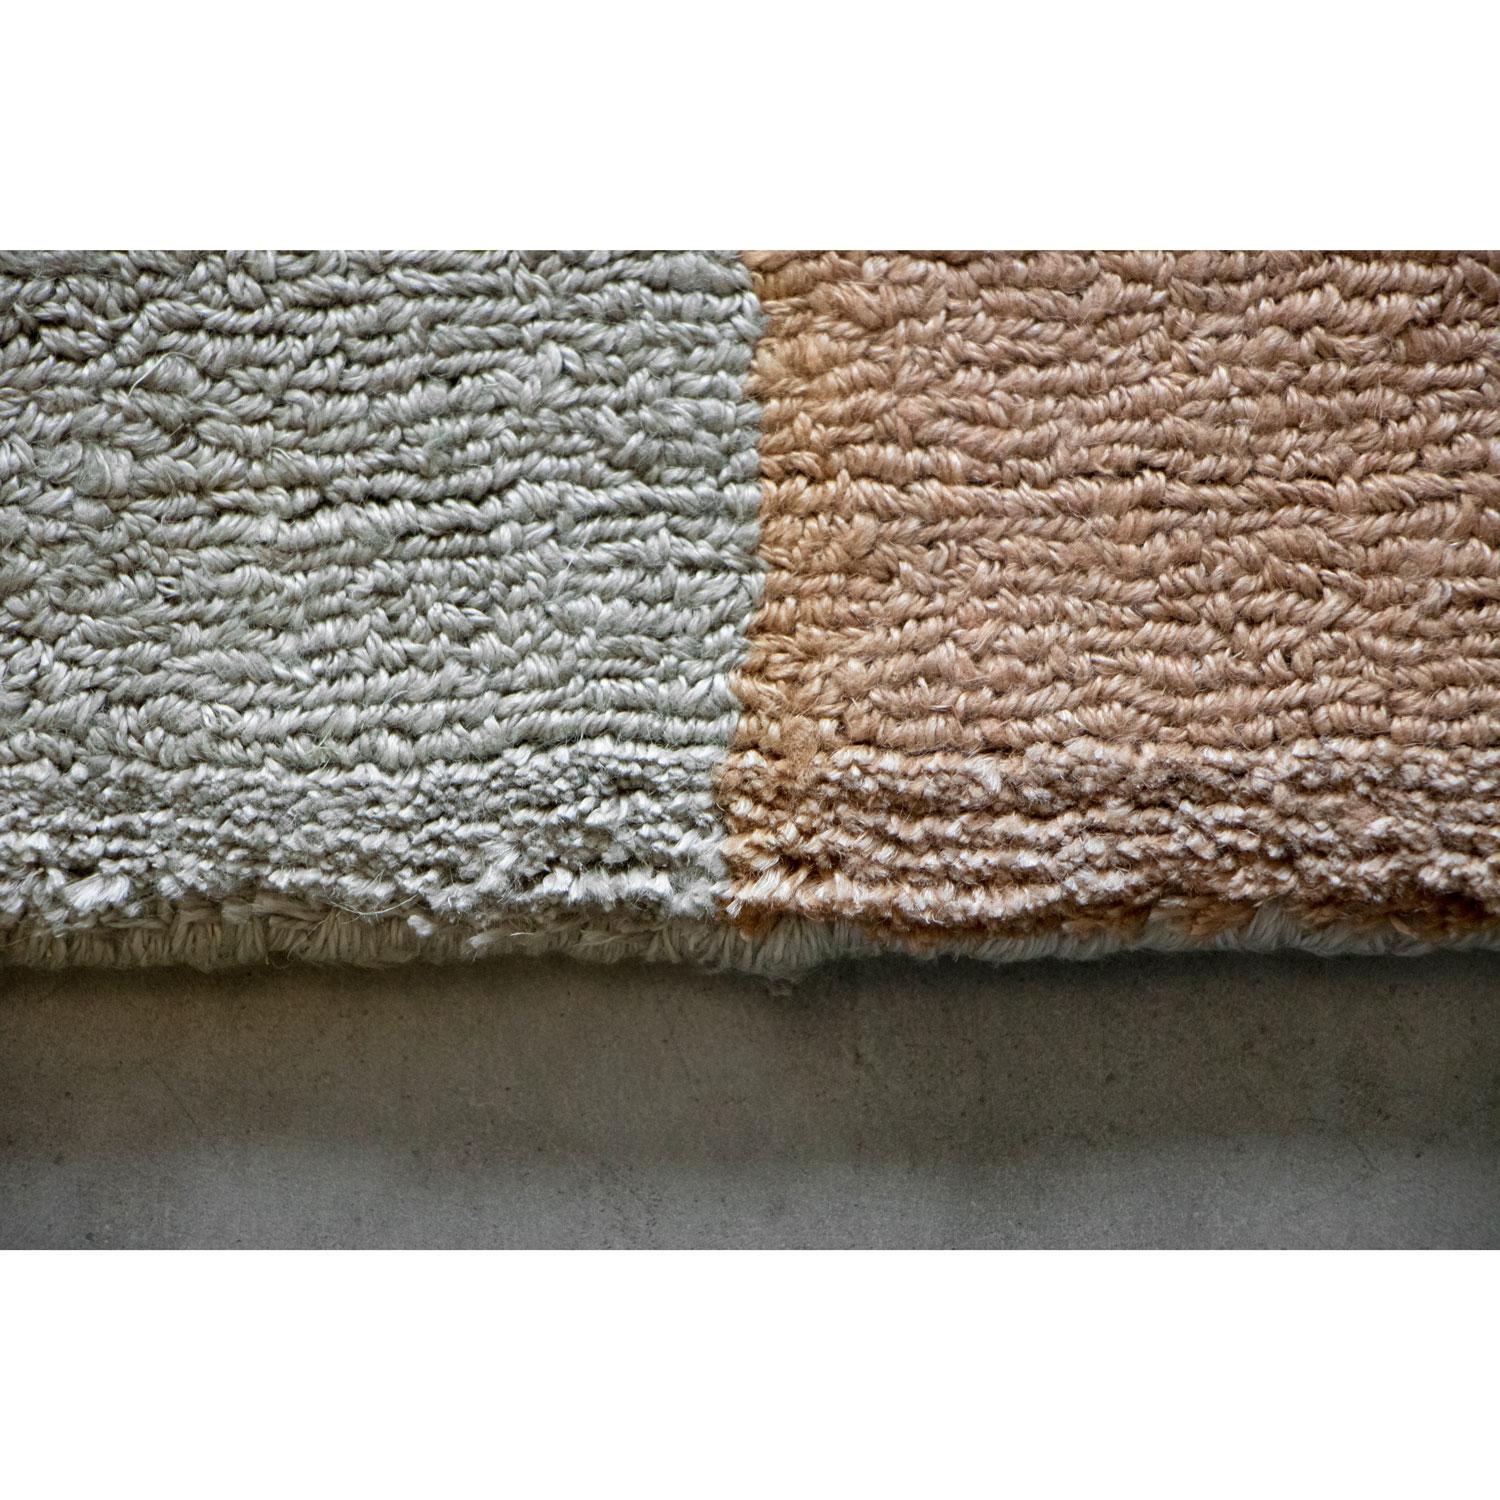 21st Cent Neutral Tones Natural Linen Rug by Deanna Comellini 150x250cm In New Condition For Sale In Bologna, IT